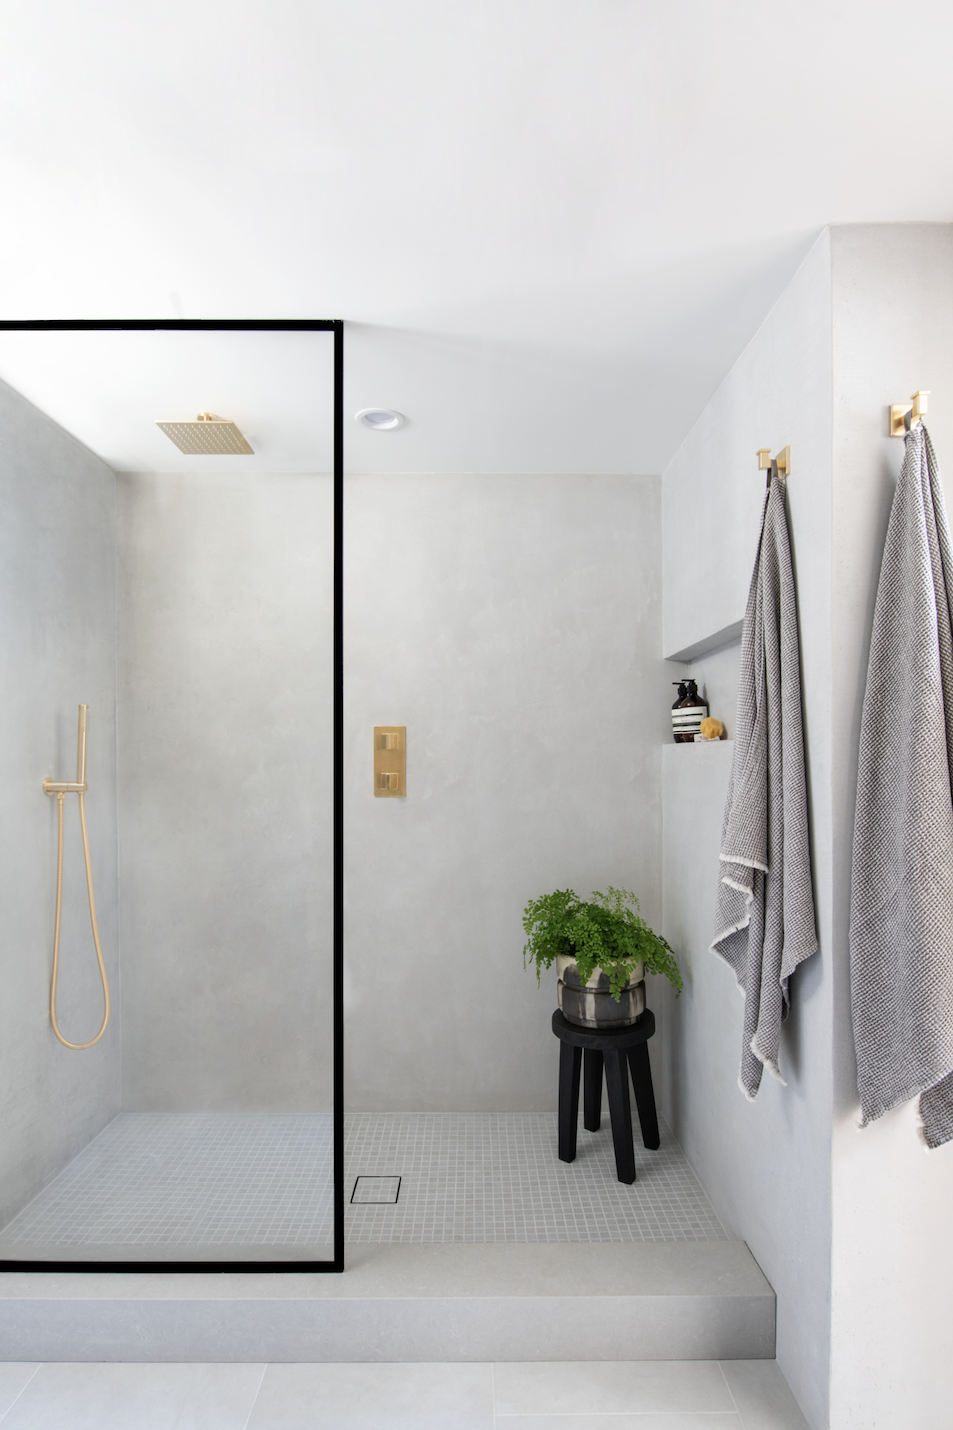 26 Stylish Walk-In Shower Ideas for Small Bathrooms